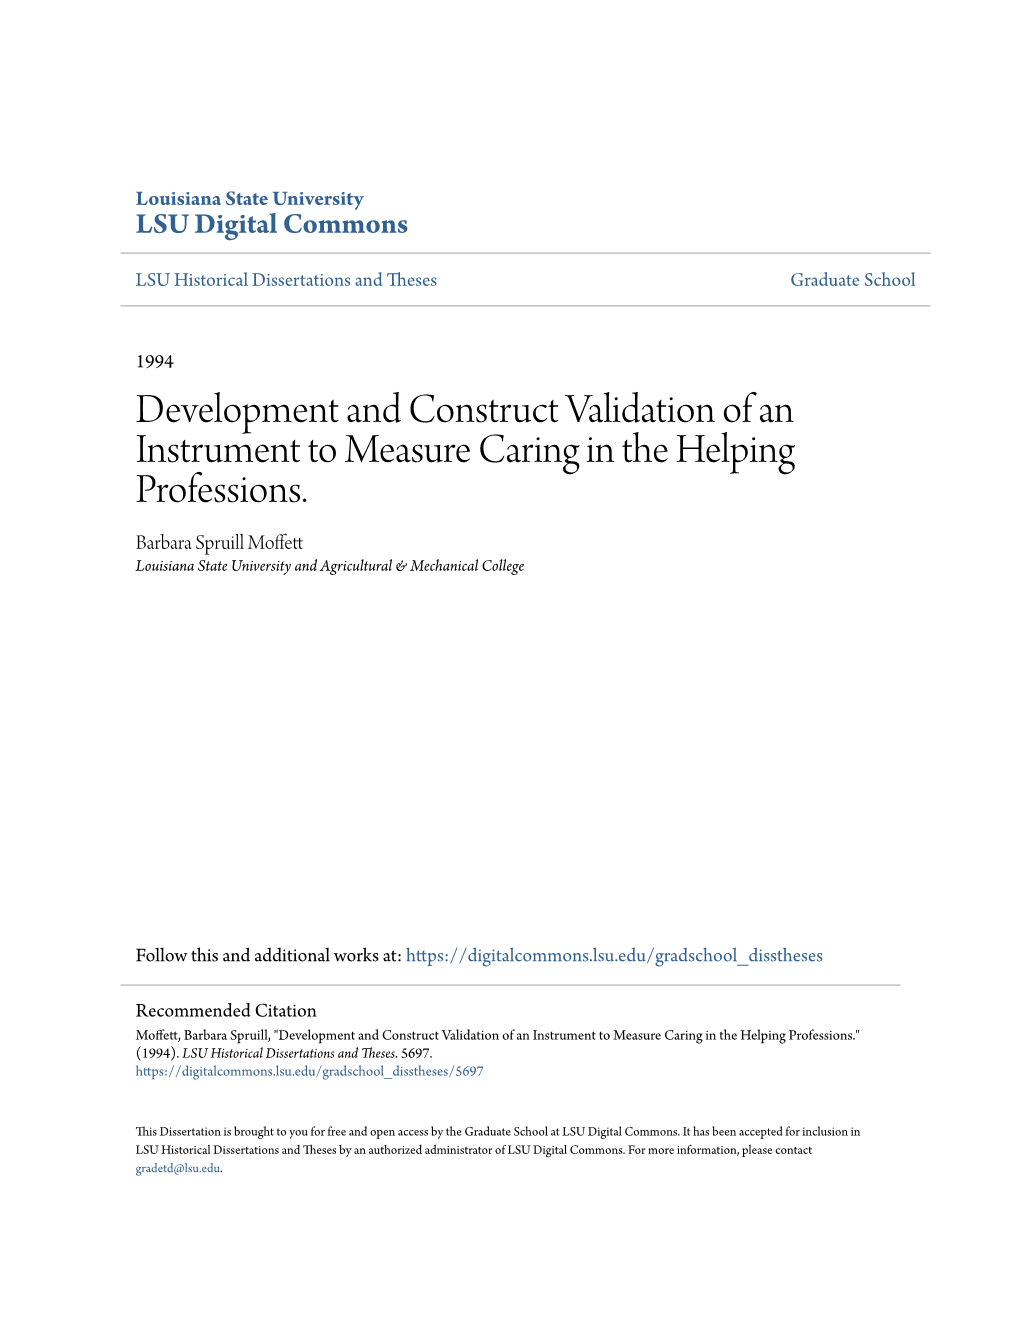 Development and Construct Validation of an Instrument to Measure Caring in the Helping Professions